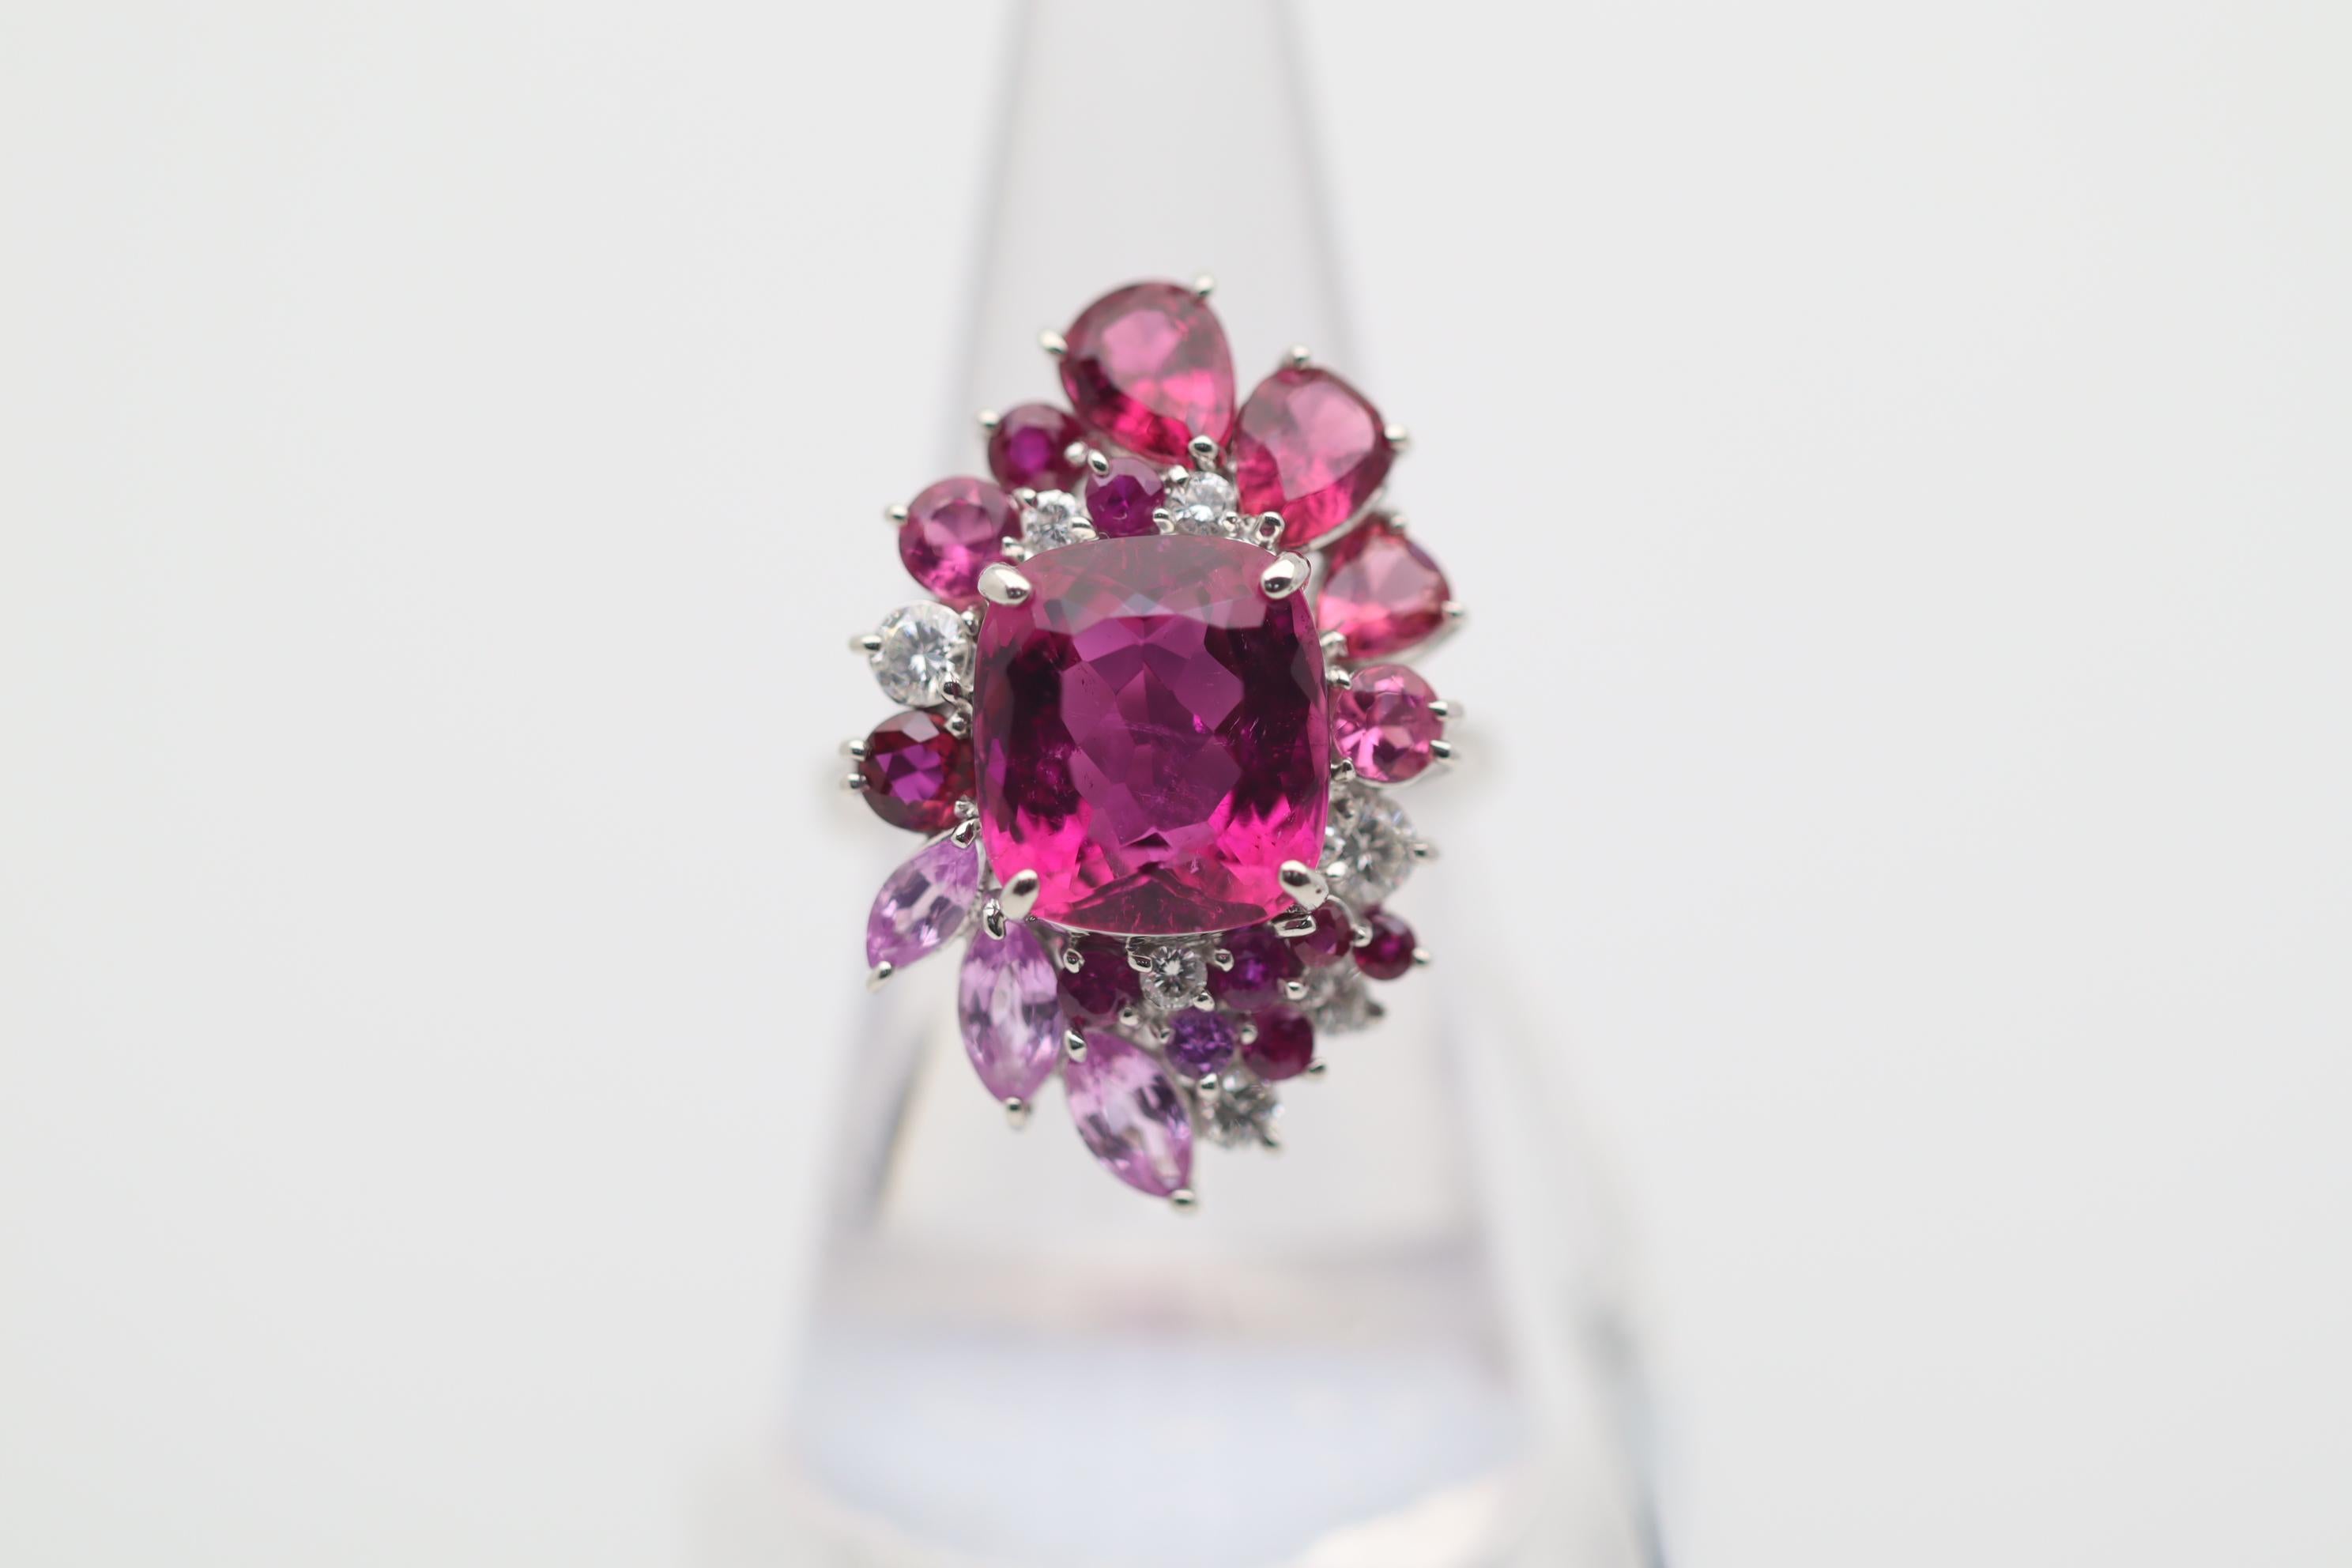 Simply a stunning top-quality piece of fine jewelry. The ring features a 6.29 carat gem rubellite tourmaline with amazing color and clarity. It has an intense and bright raspberry-red color which is completely eye clean with excellent brilliance. It